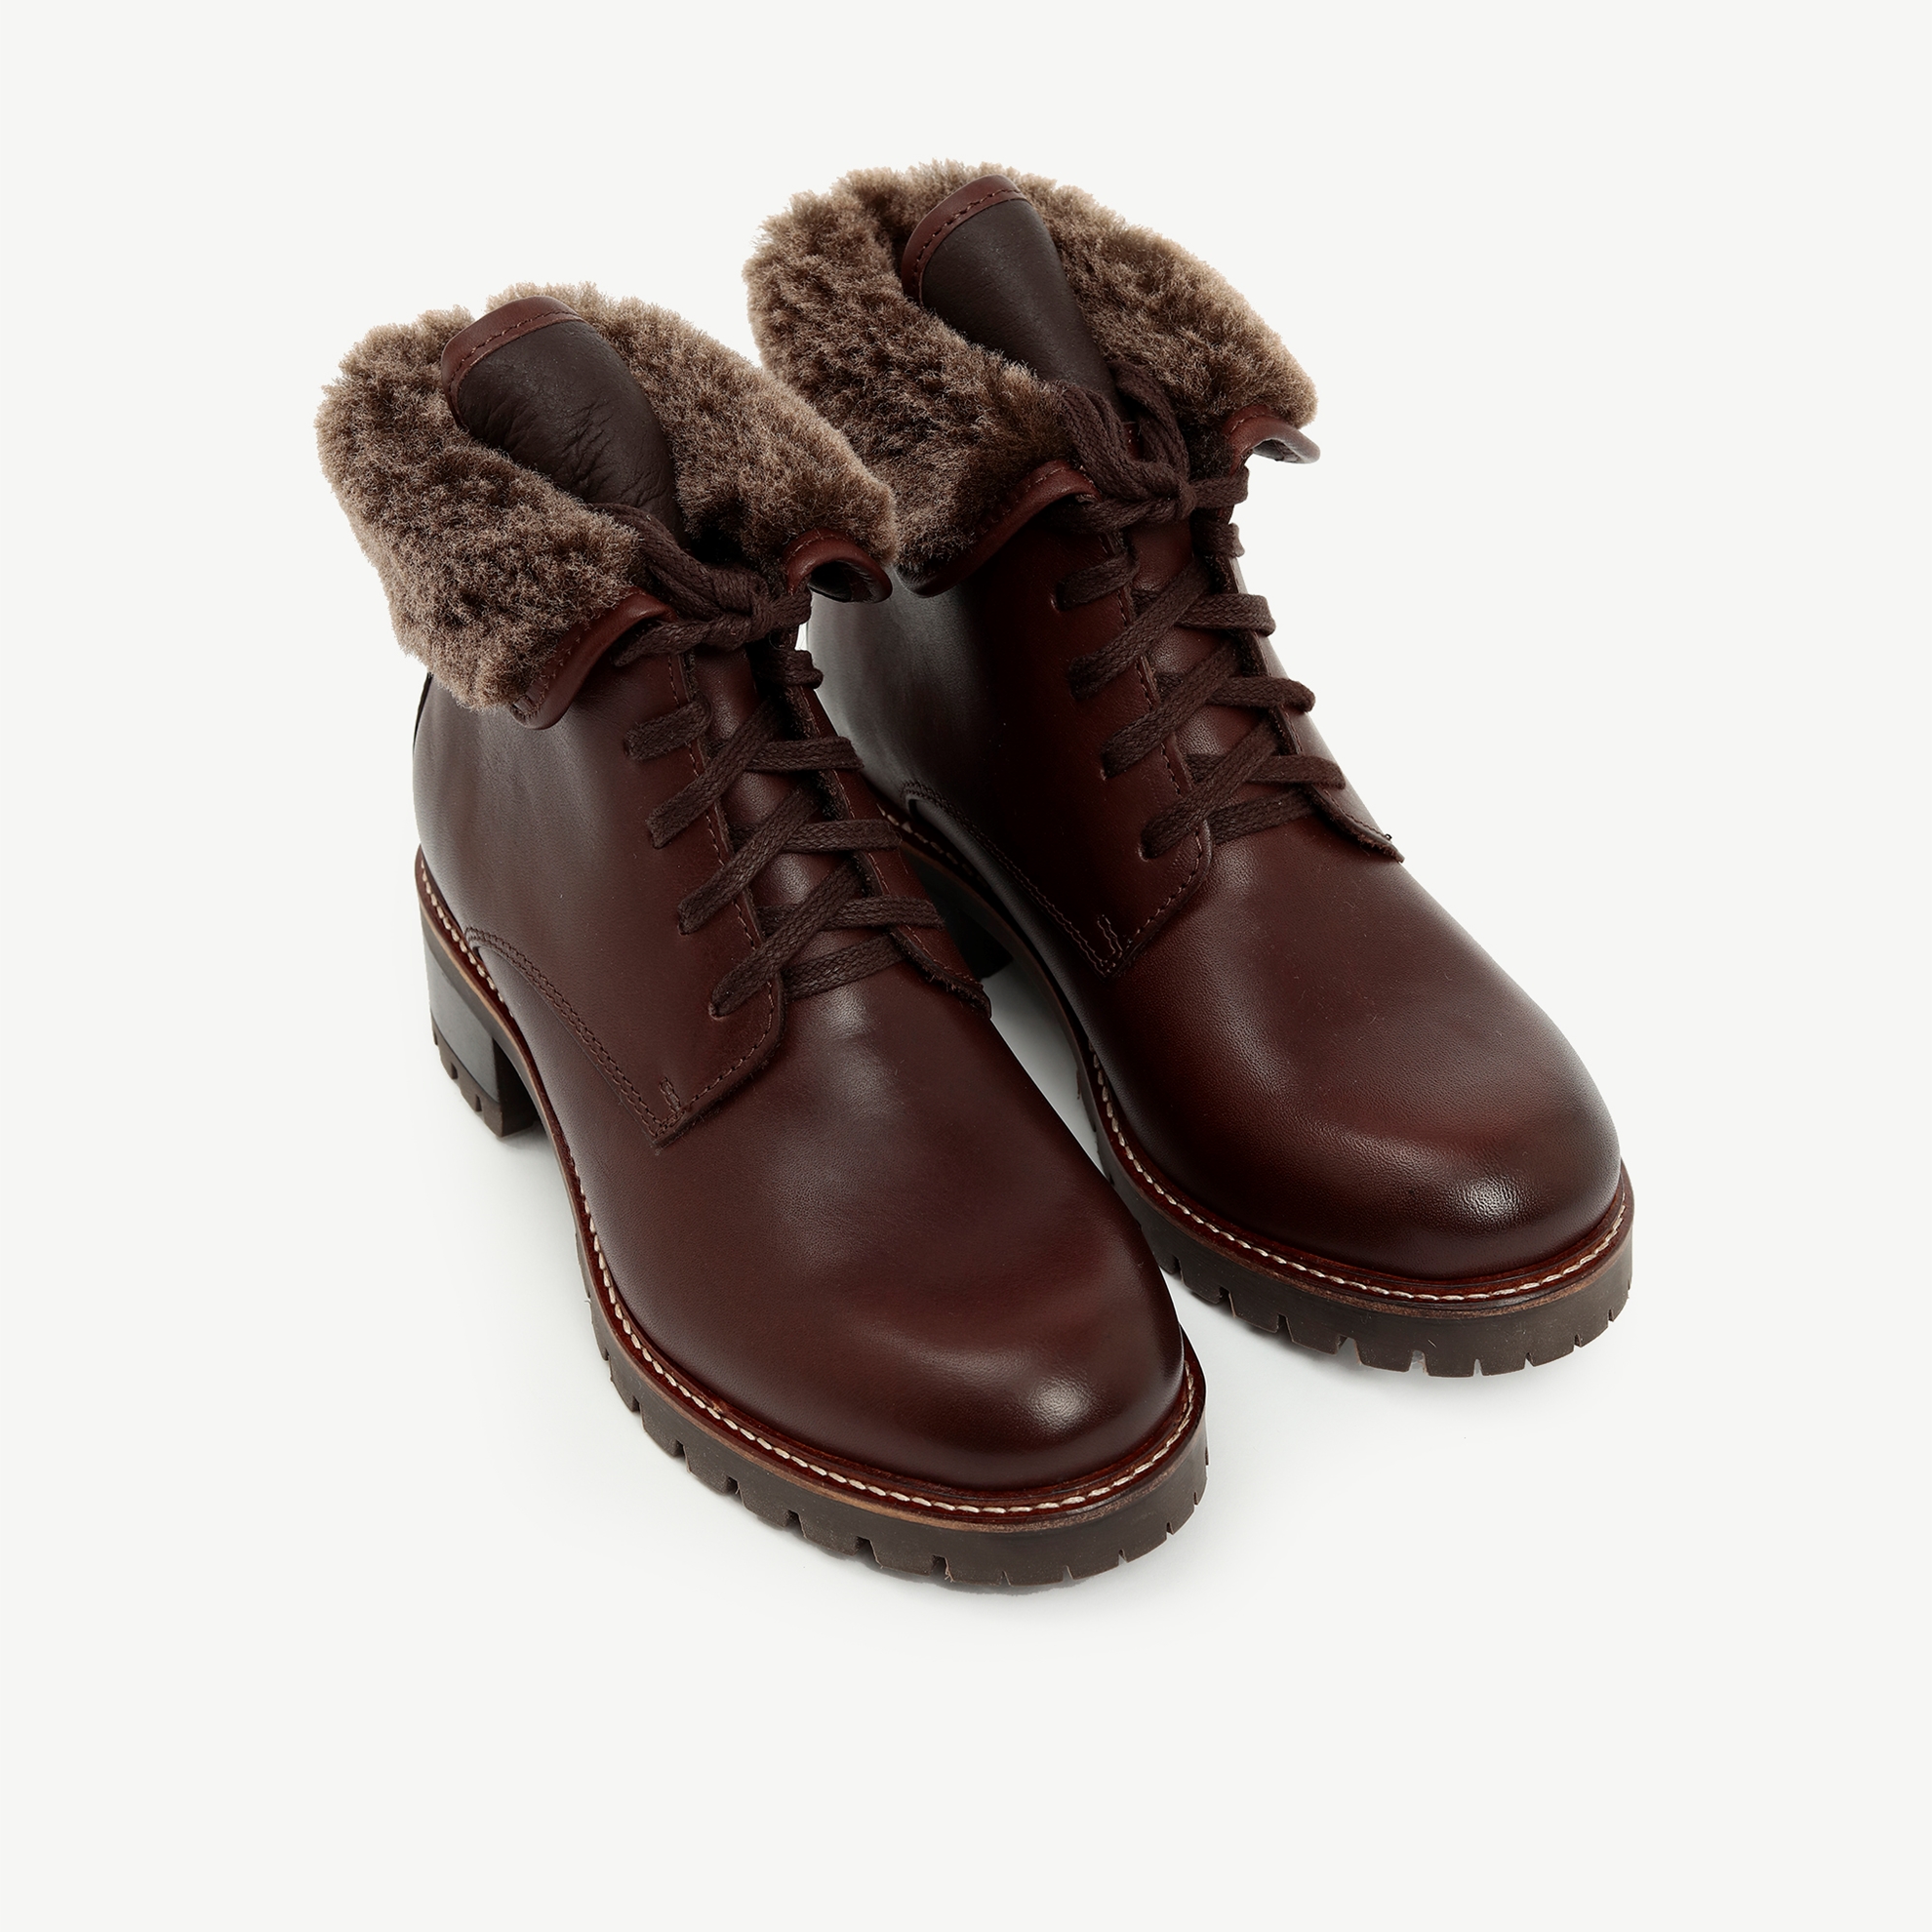 Boots With Fur Detail